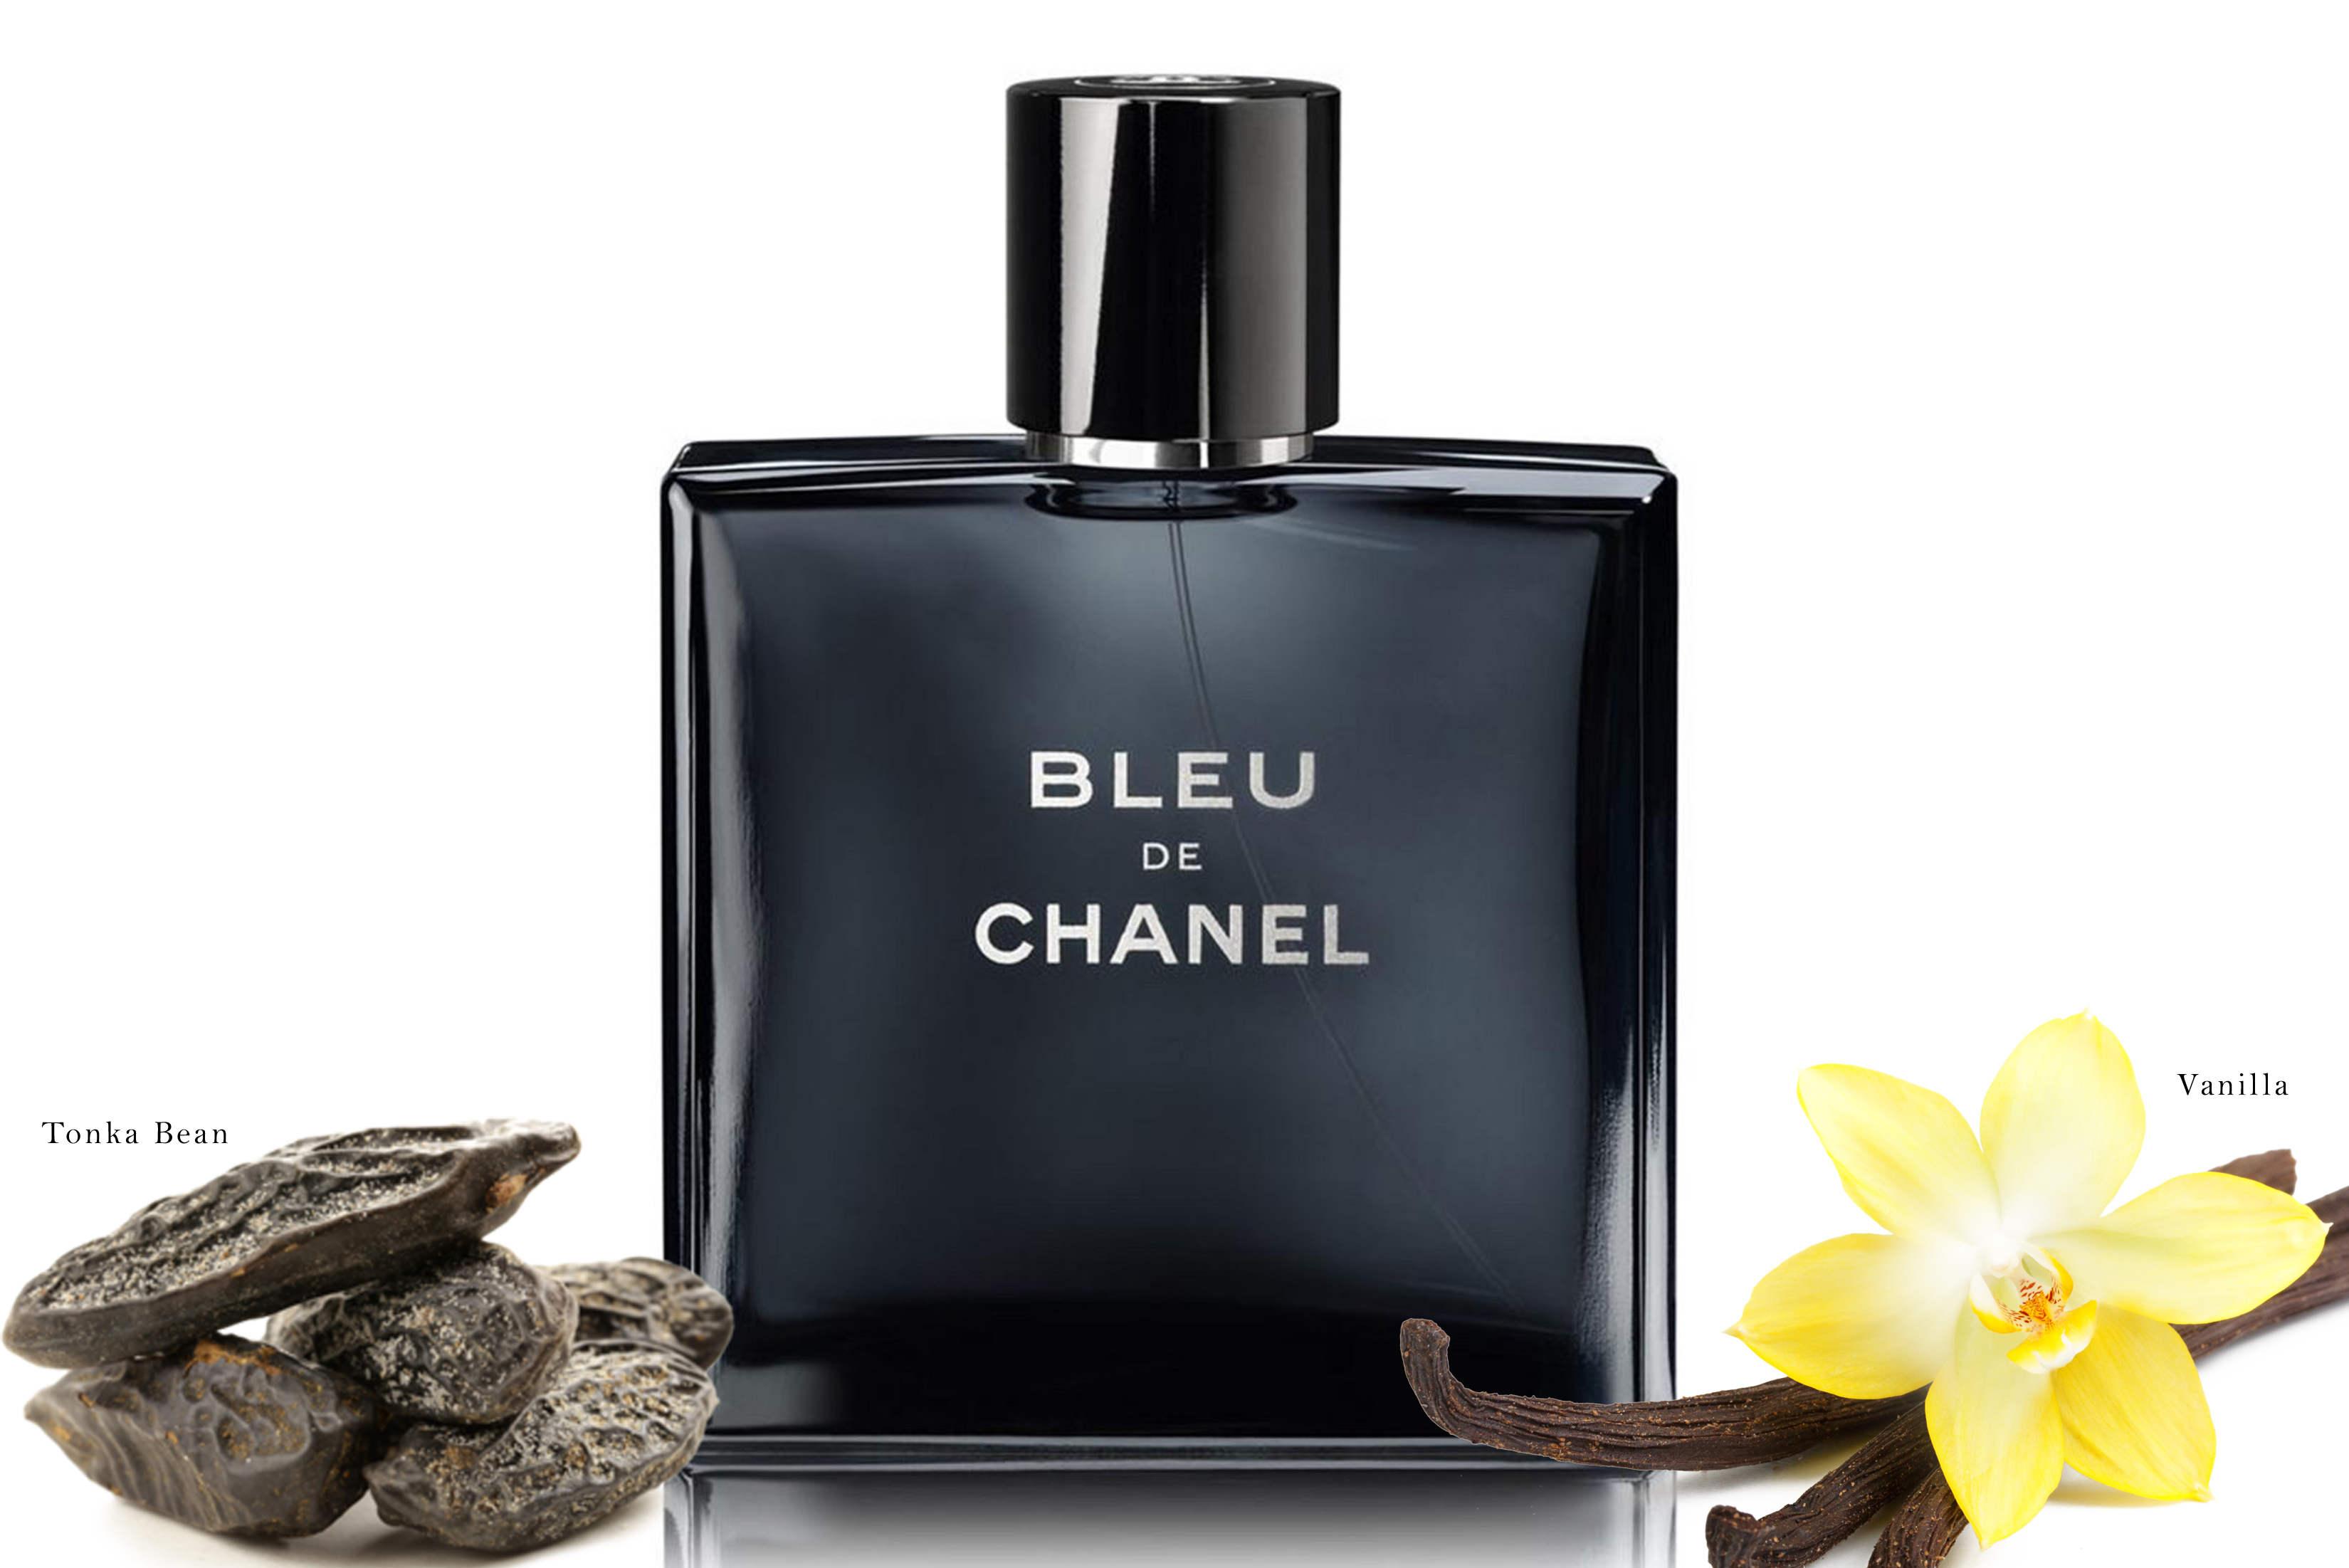 Gift Dad With The Bleu de Chanel Collection This Father's Day | LATF ...